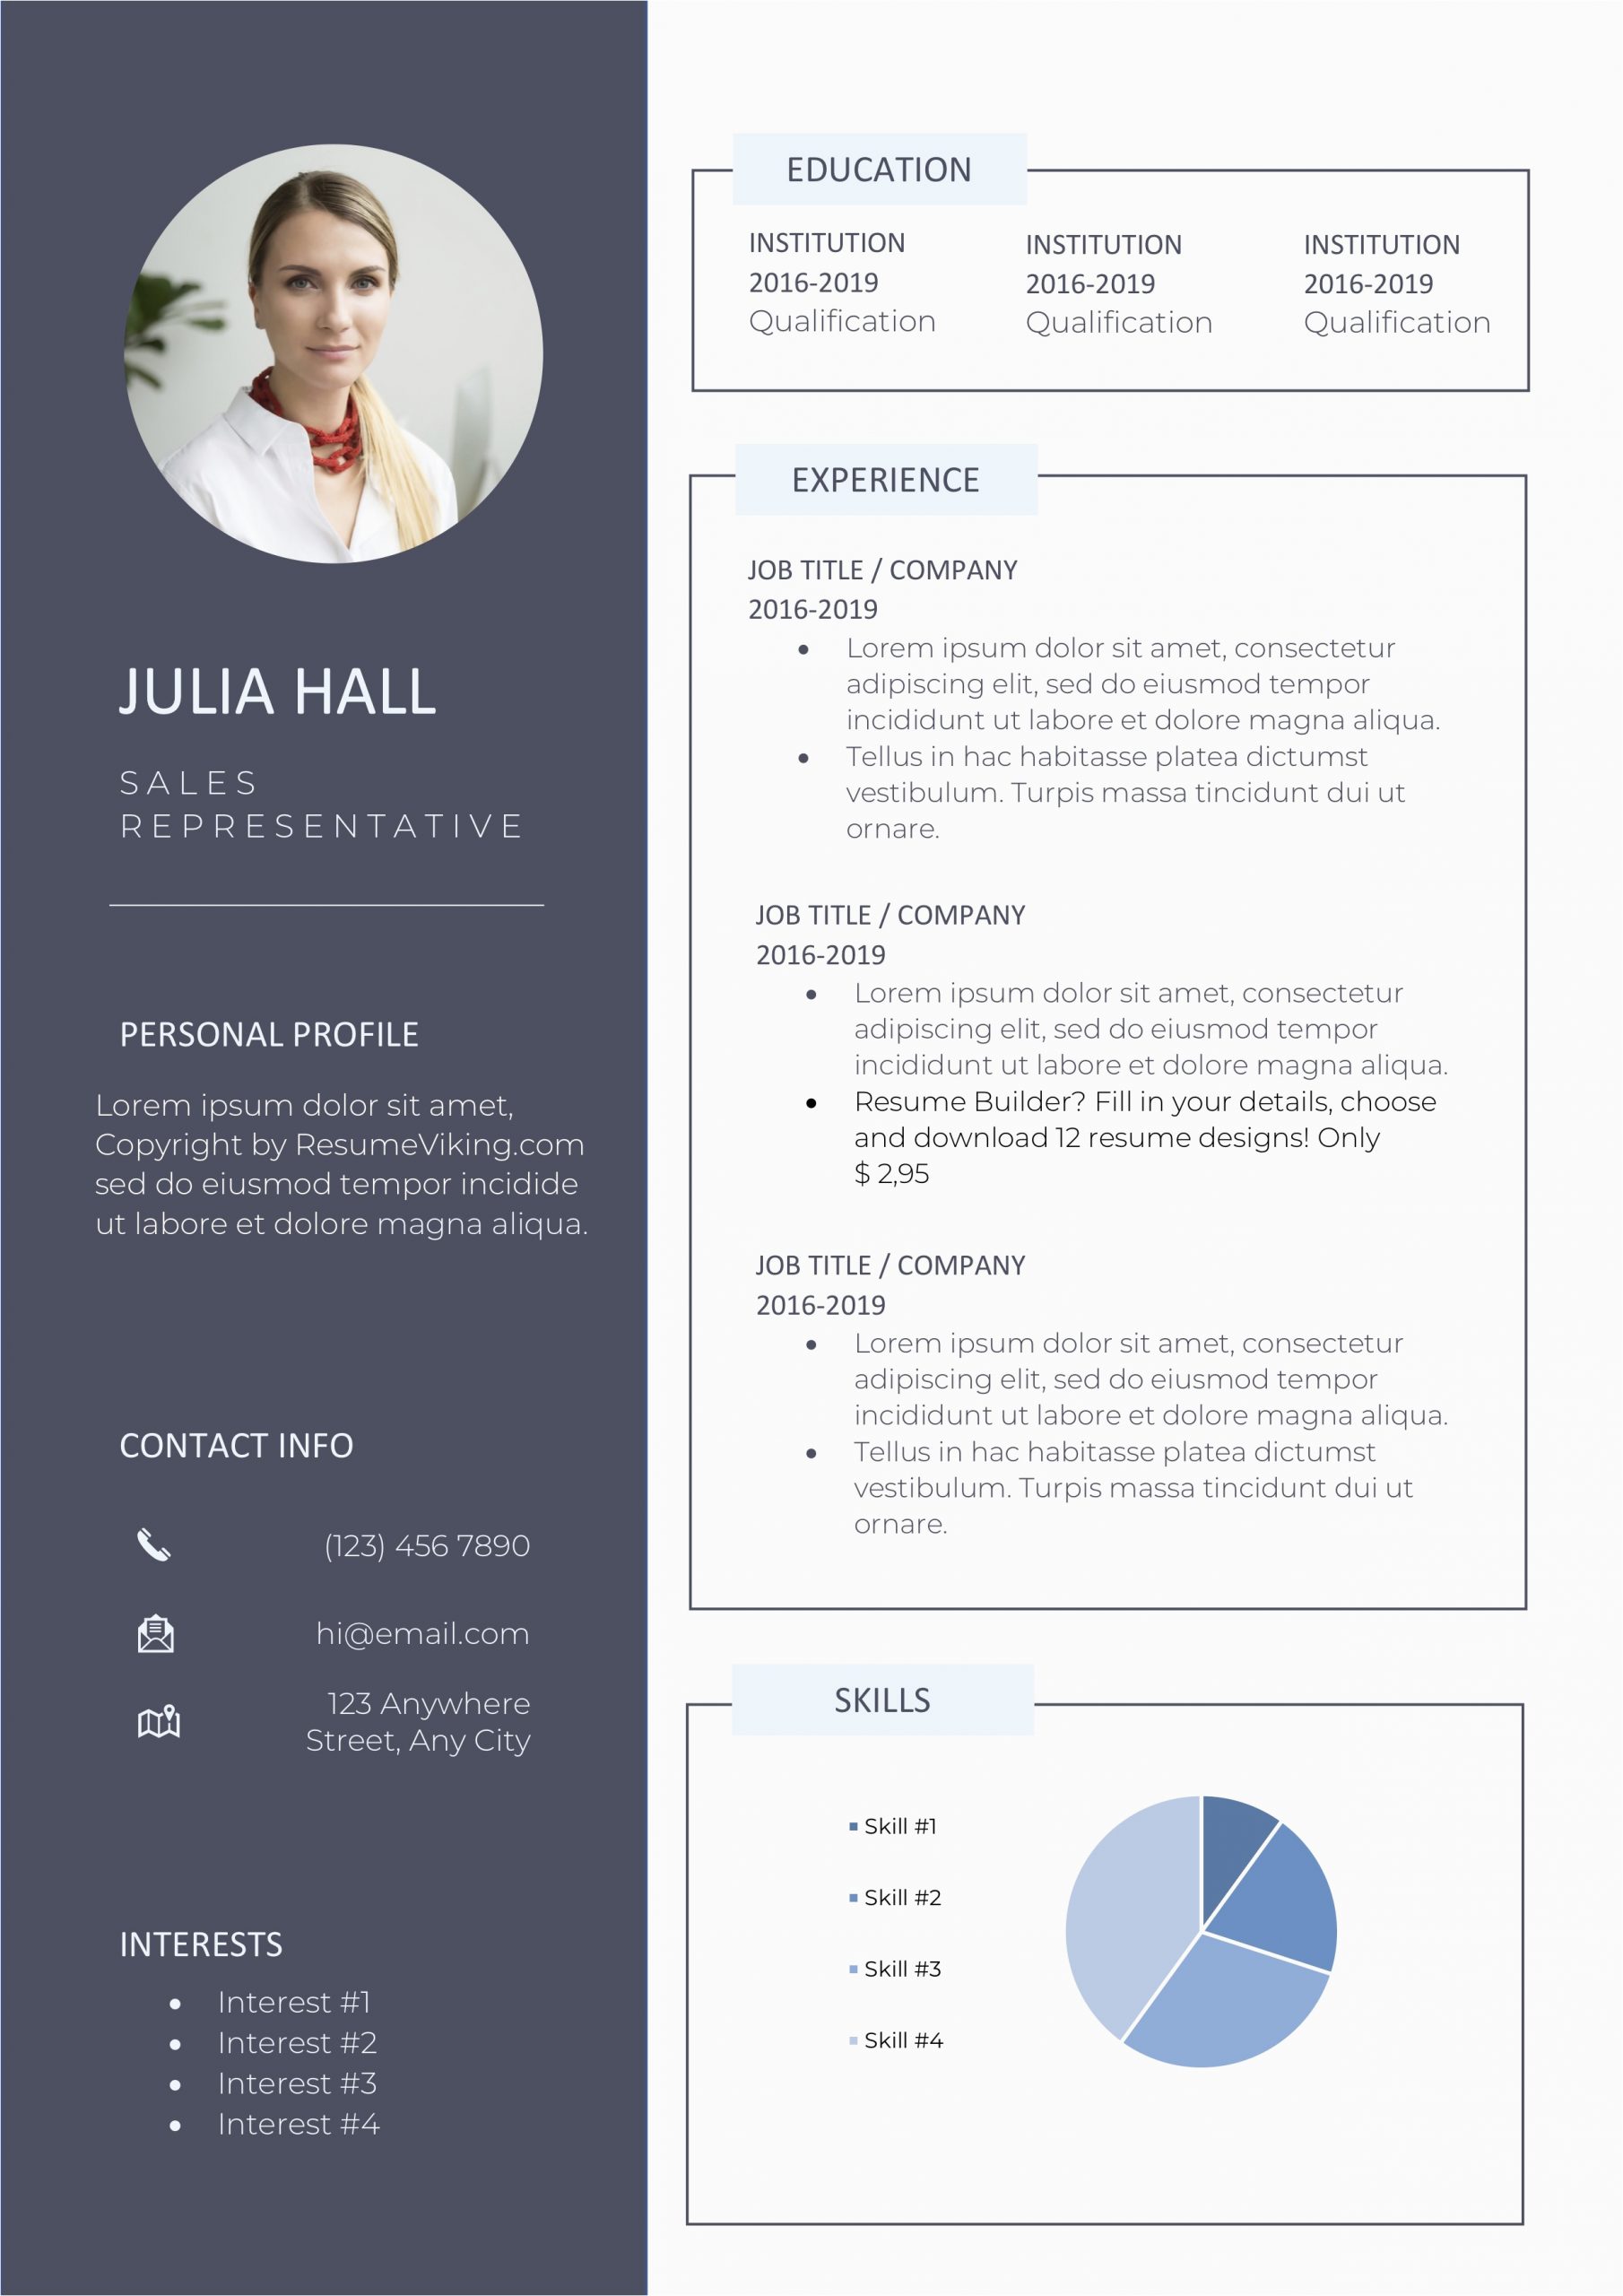 Free Download Resume Template with Picture 76 Free Resume Templates [2021] Pdf & Word Downloads